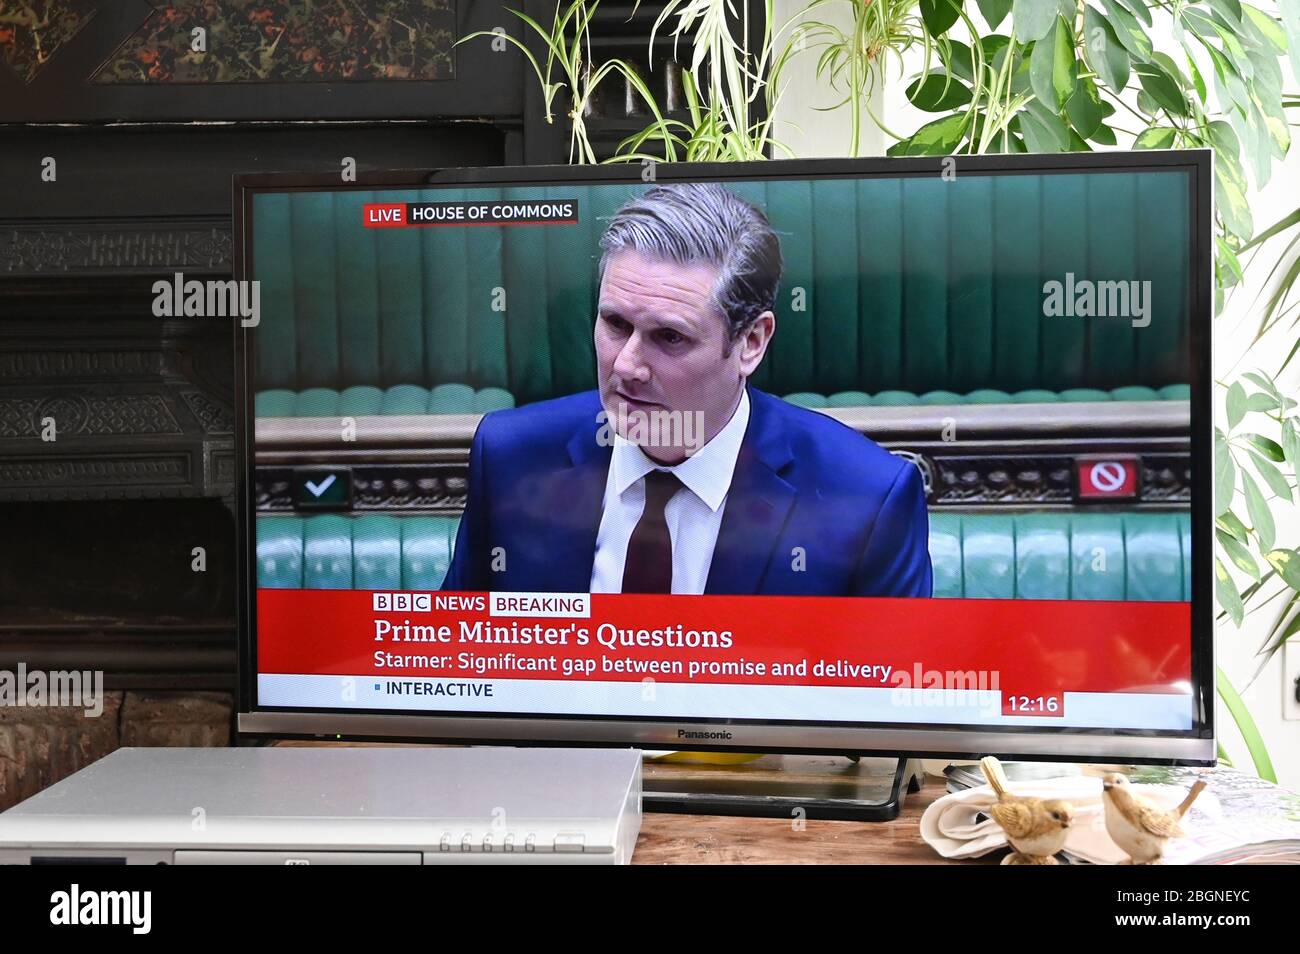 The Leader of the Labour Party Sir Keir Starmer asking 'deputy' Prime Minister Dominic Raab questions about Covid testing at PMQs. UK Parliament. Stock Photo